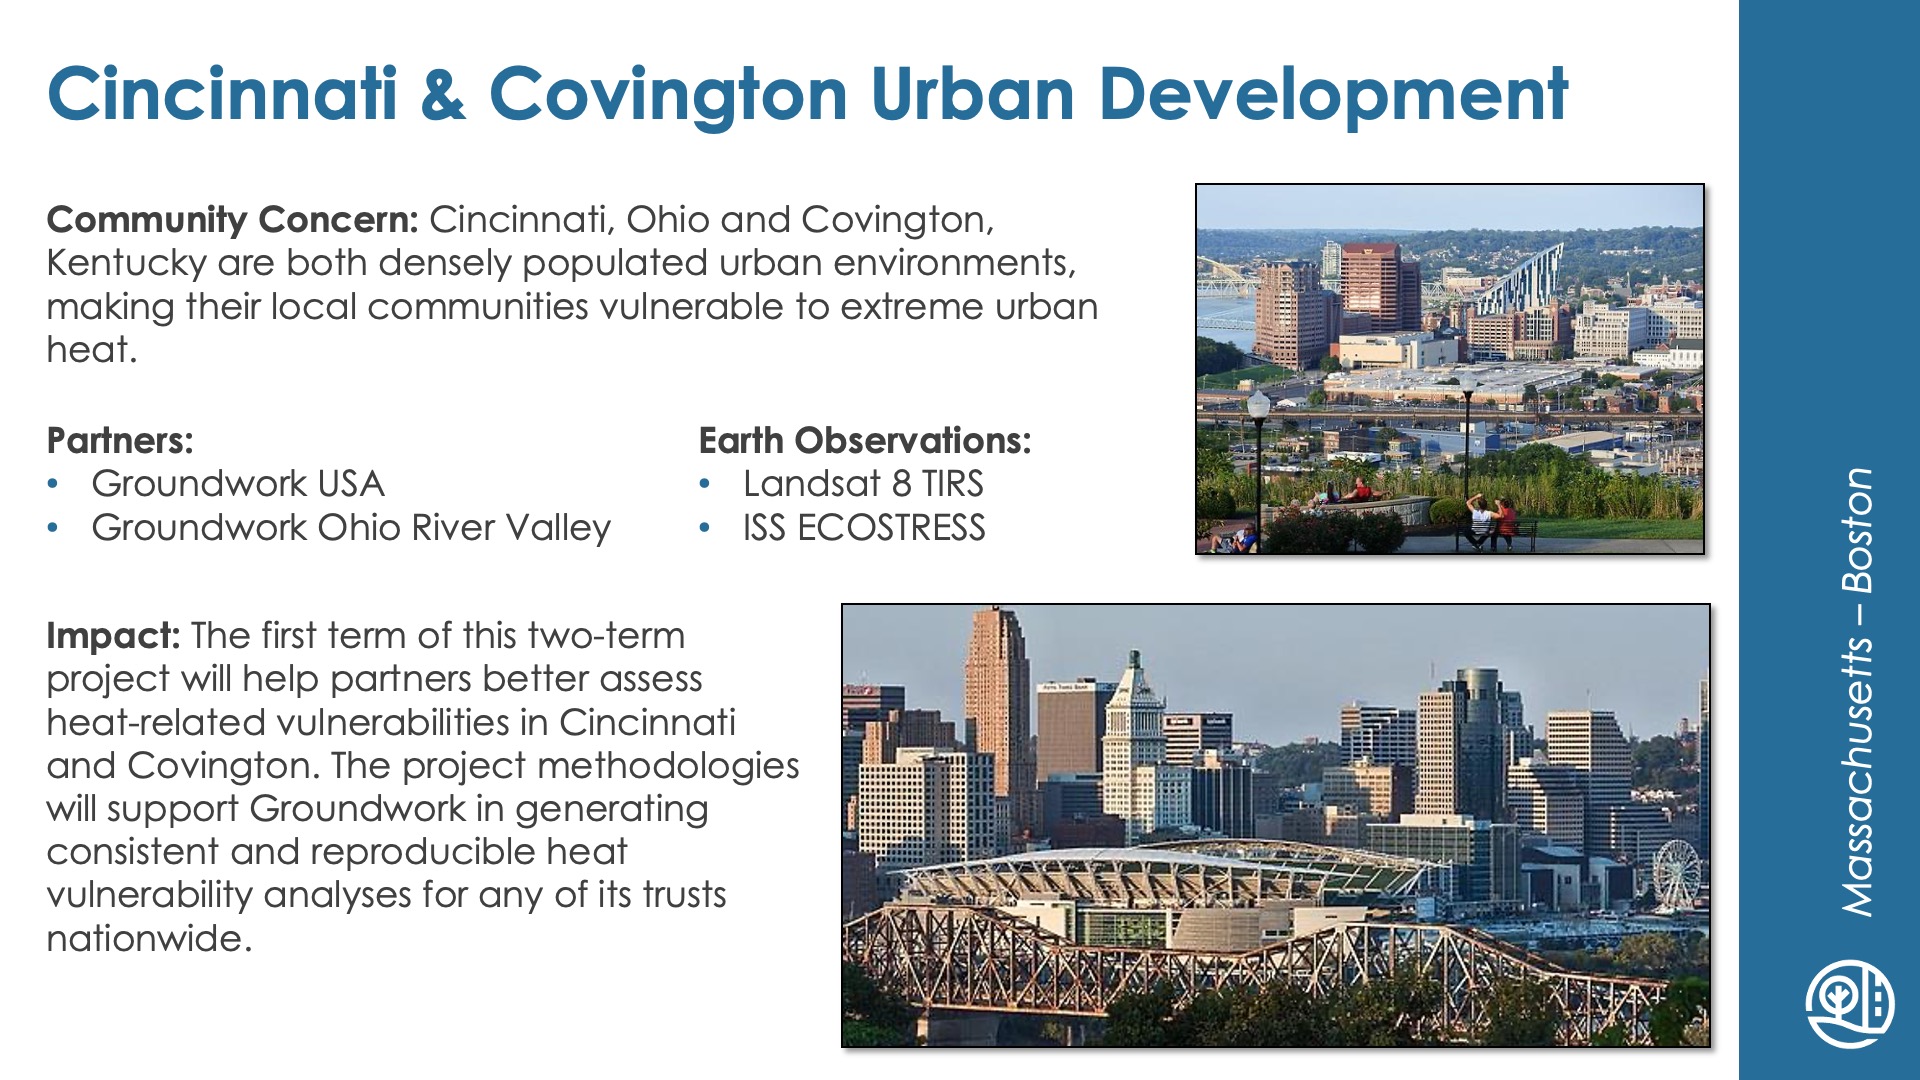 Slide title: Cincinnati & Covington Urban DevelopmentDEVELOP Node: Massachusetts - BostonCommunity Concern: Cincinnati, Ohio and Covington, Kentucky are both densely populated urban environments, making their local communities vulnerable to extreme urban heat.Impact: The first term of this two-term project will help partners better assess heat-related vulnerabilities in Cincinnati and Covington. The project methodologies will support Groundwork in generating consistent and reproducible heat vulnerability analyses for any of its trusts nationwide.Partners: Groundwork USA, Groundwork Ohio River ValleyEarth Observations: Landsat 8 TIRS, ISS ECOSTRESS